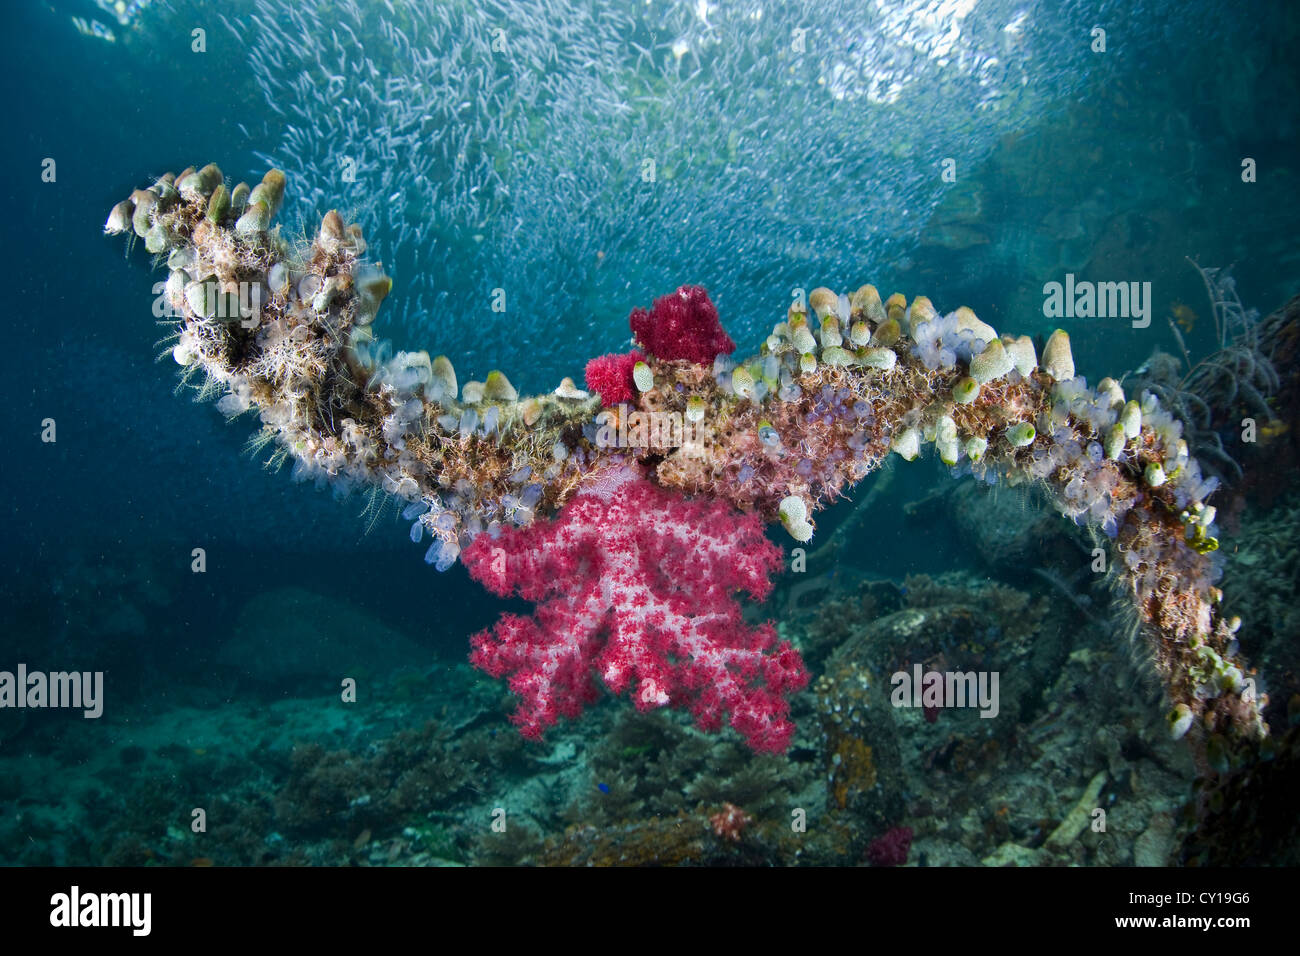 Corals and Tunicates growing on Tree Branch, Raja Ampat, West Papua, Indonesia Stock Photo